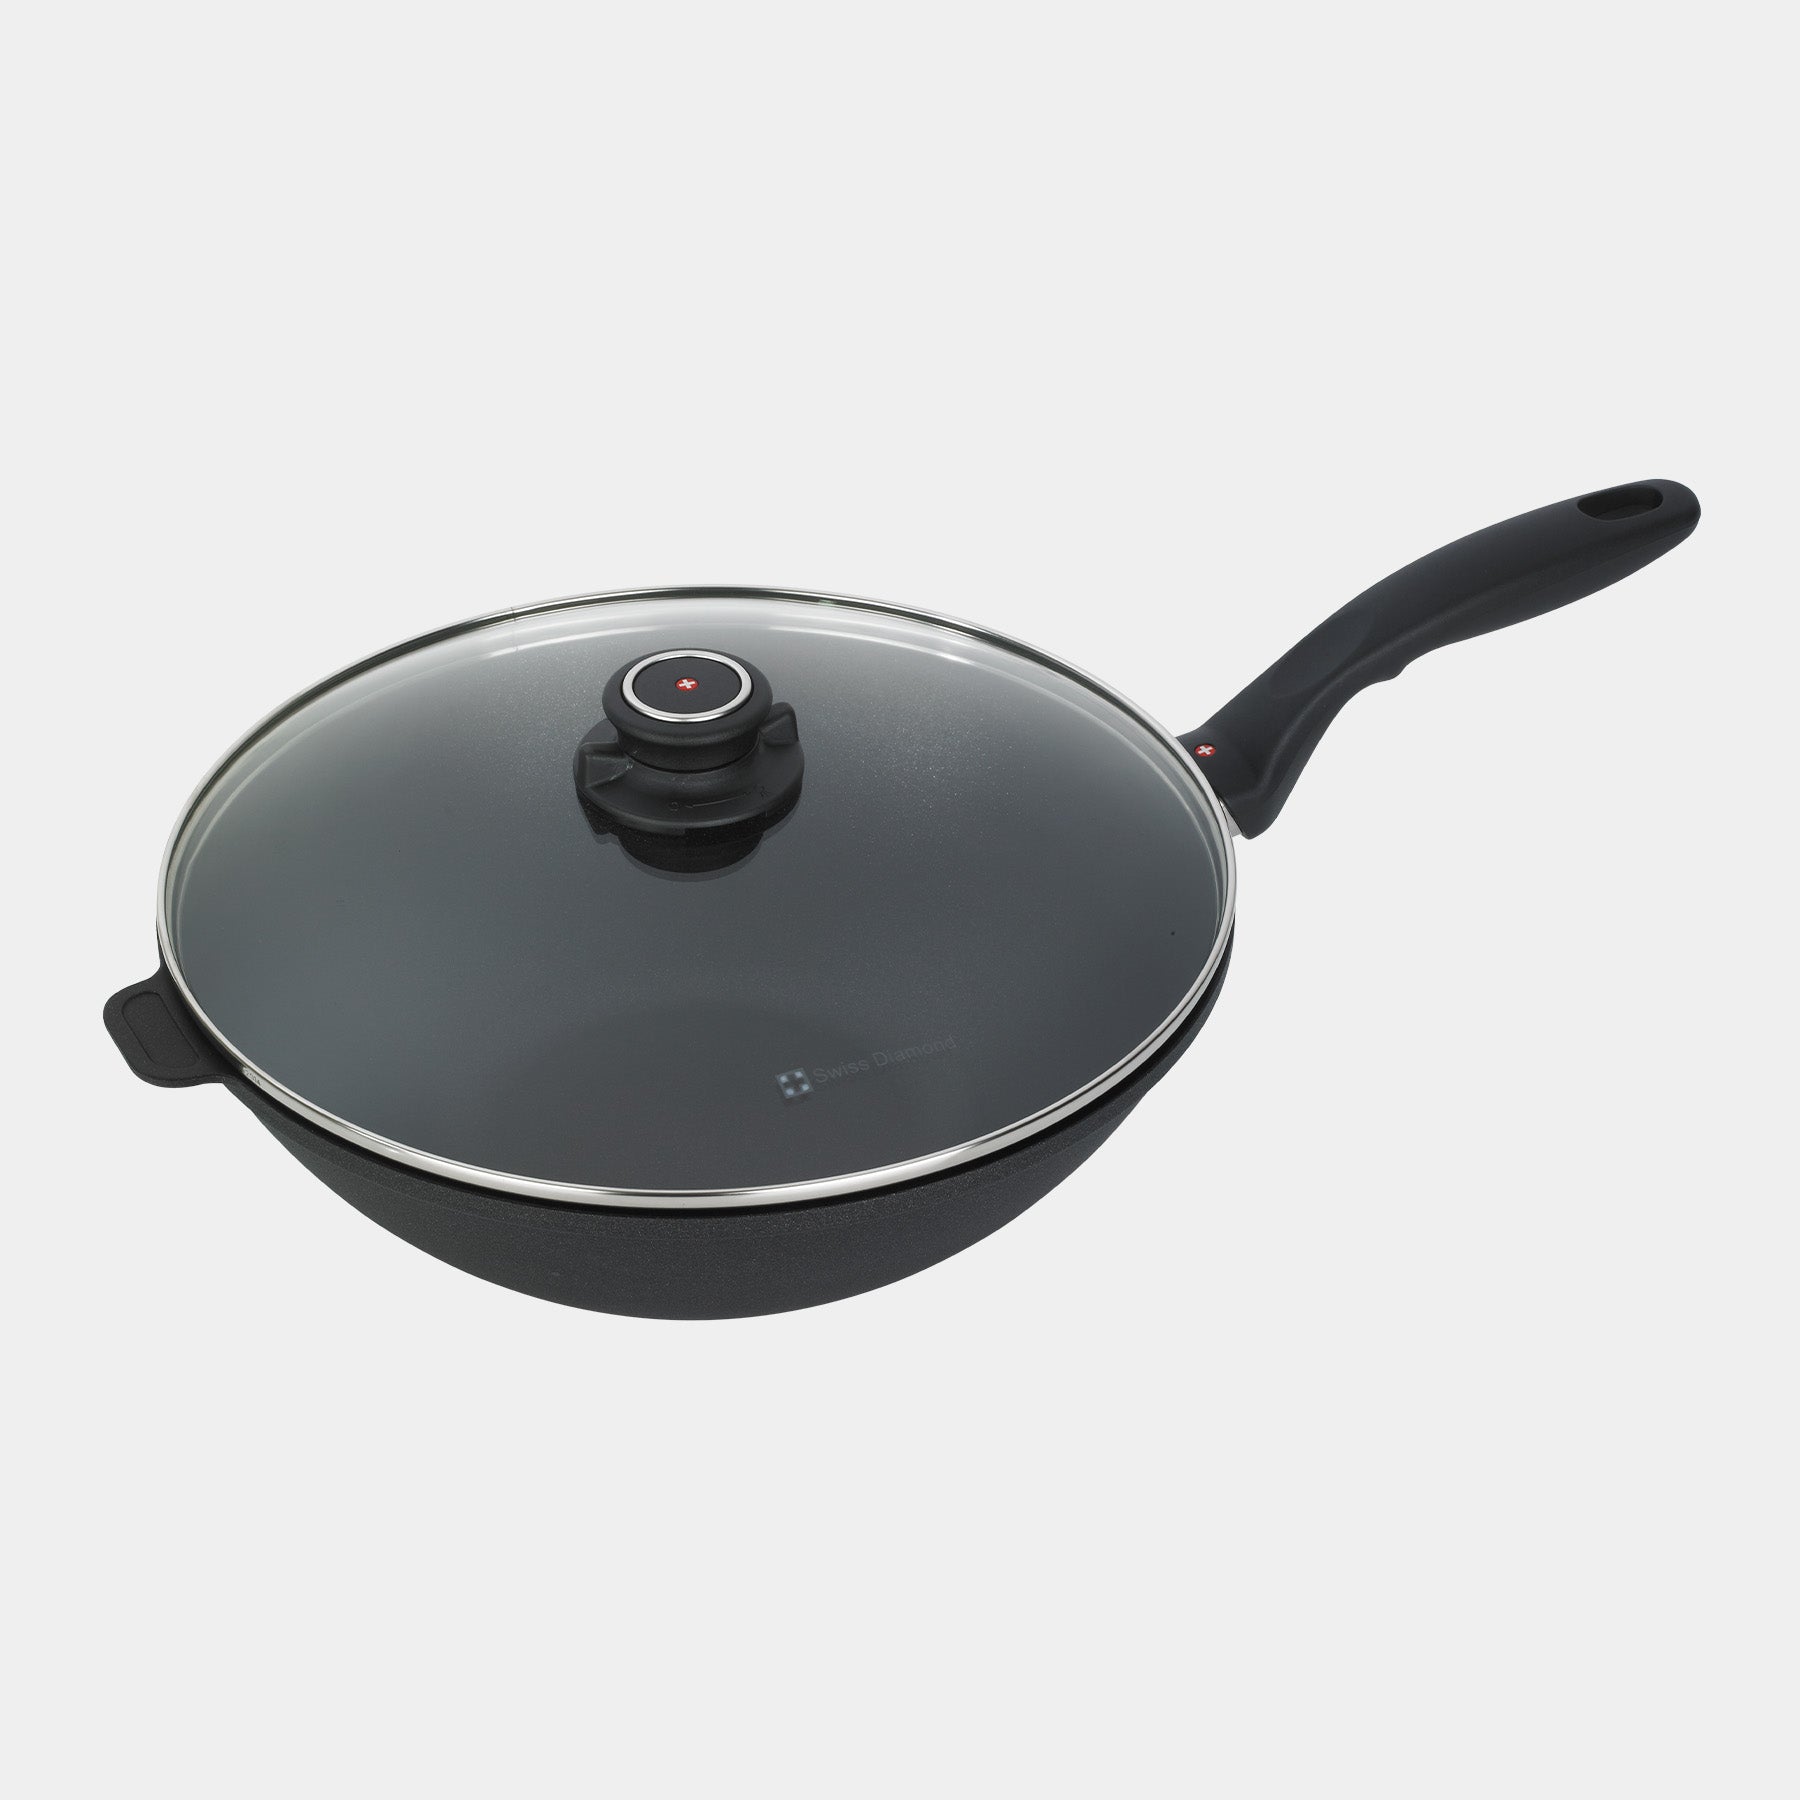 XD Nonstick 11.8" Wok with Glass Lid & Rack - Induction